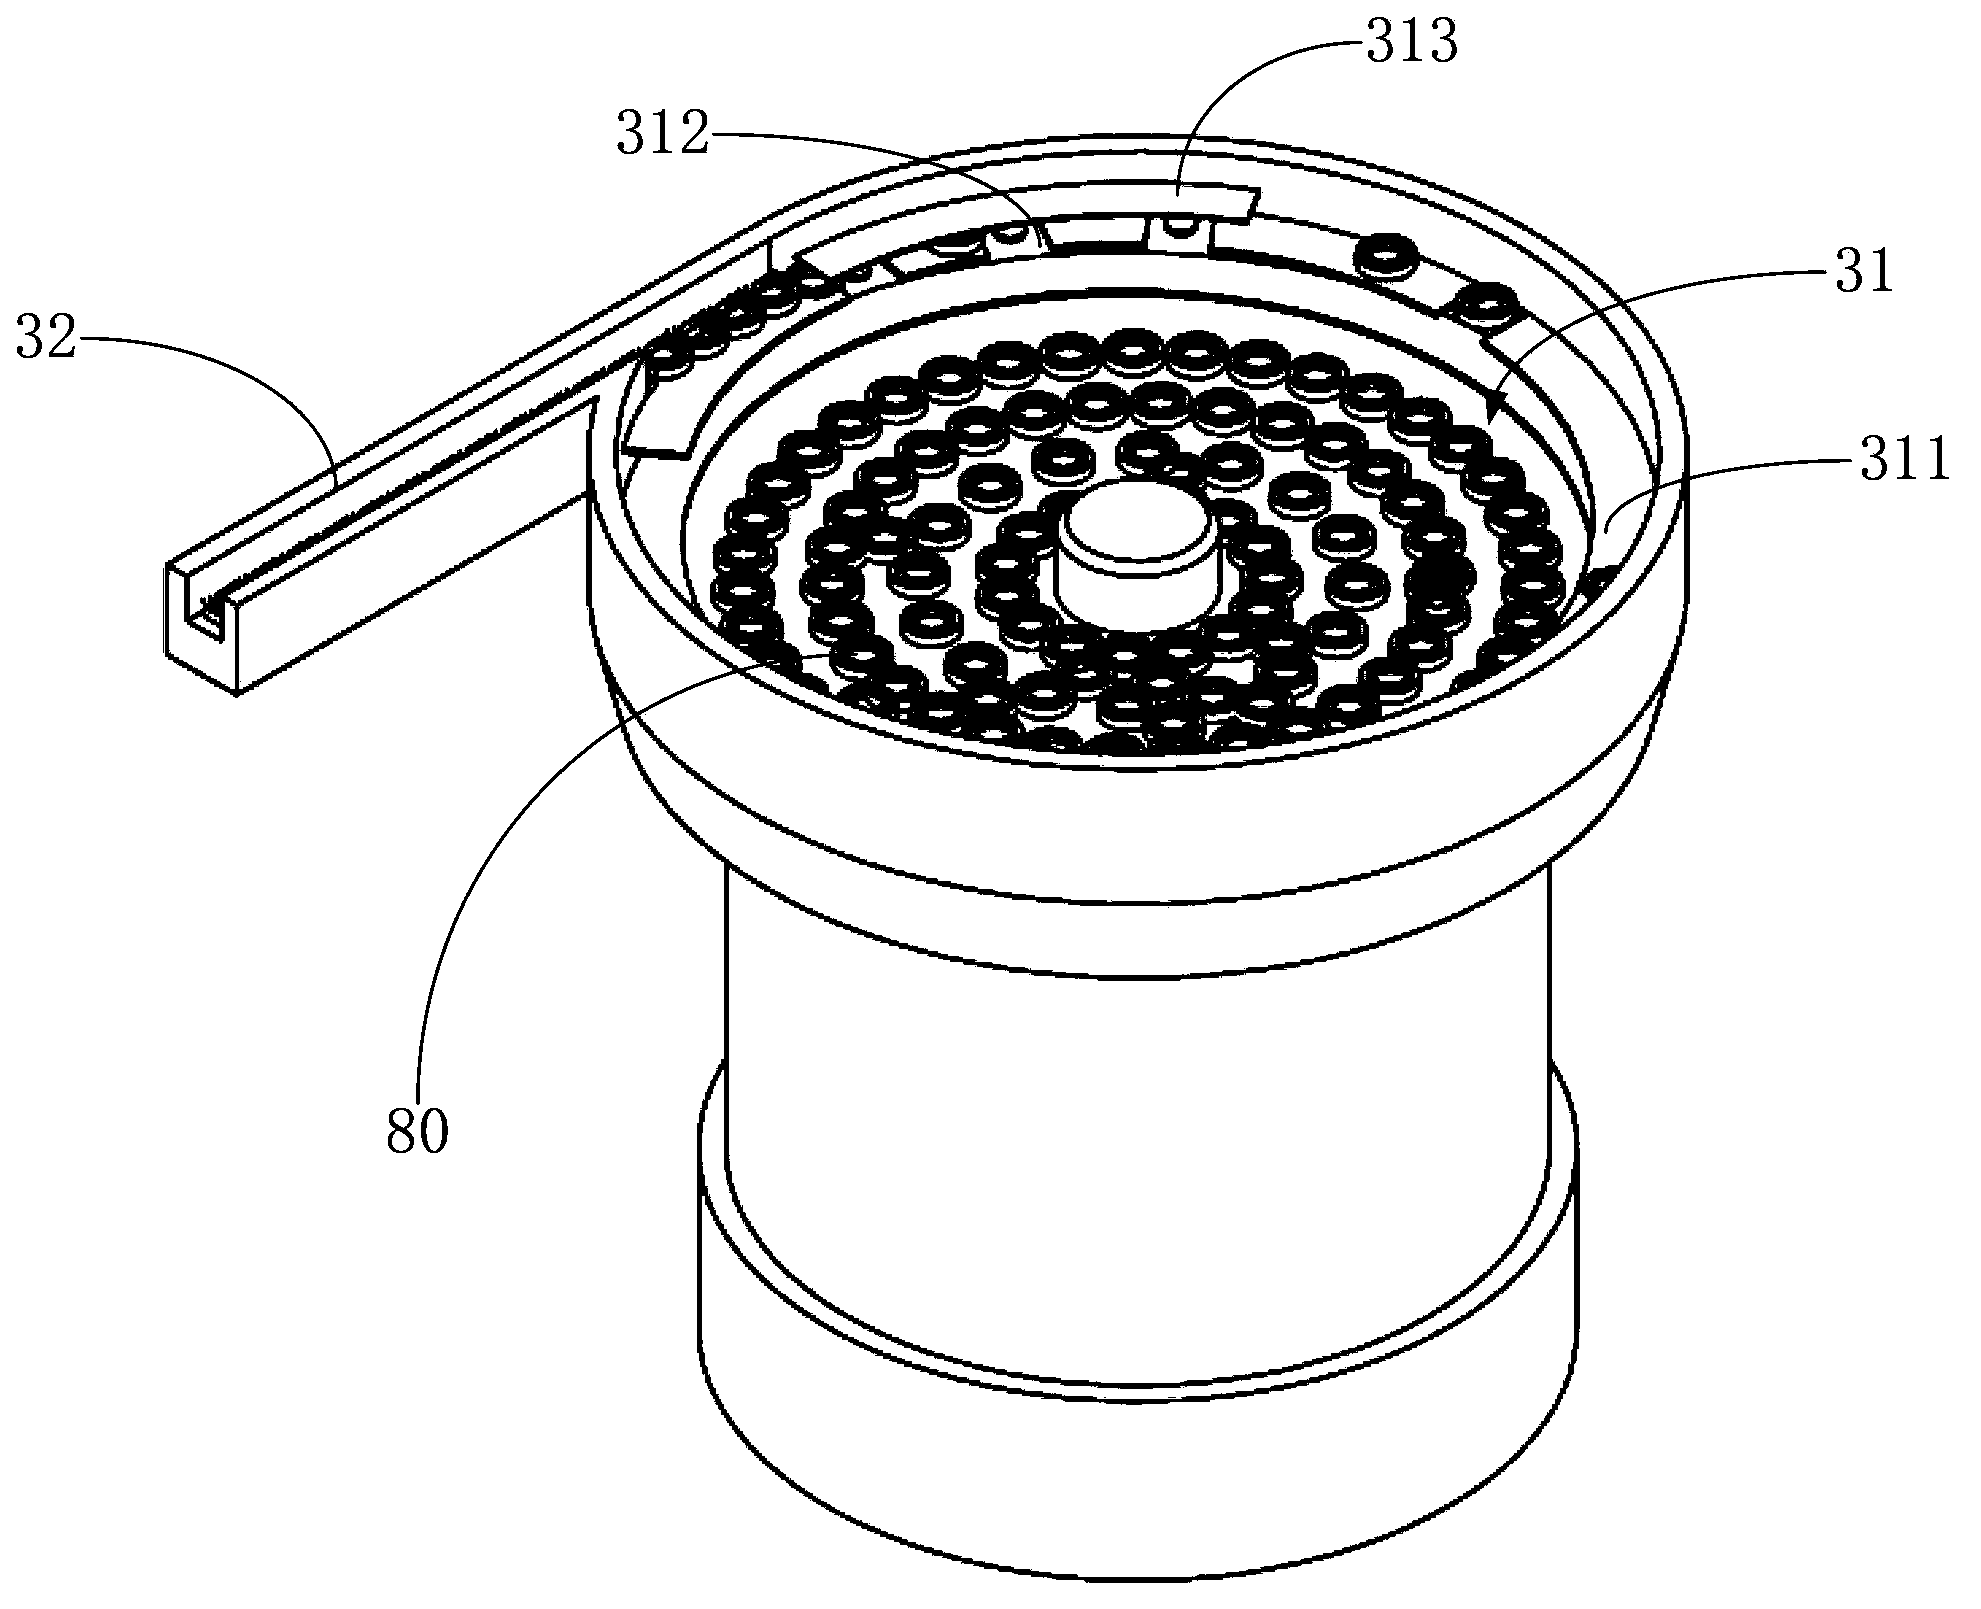 Assembling device and method for bearing sealing sleeves